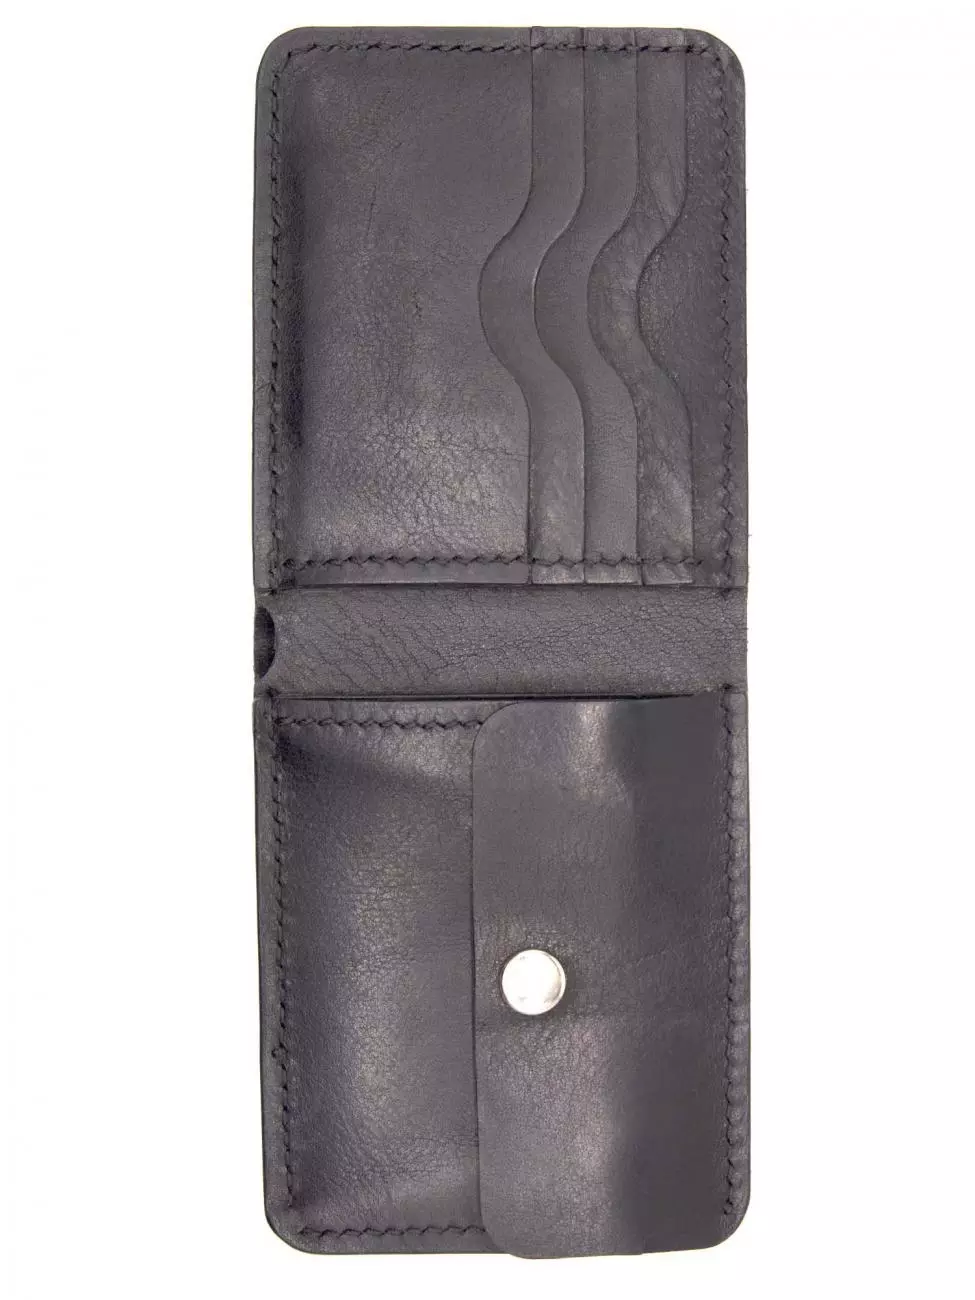 4 - Small leather wallet